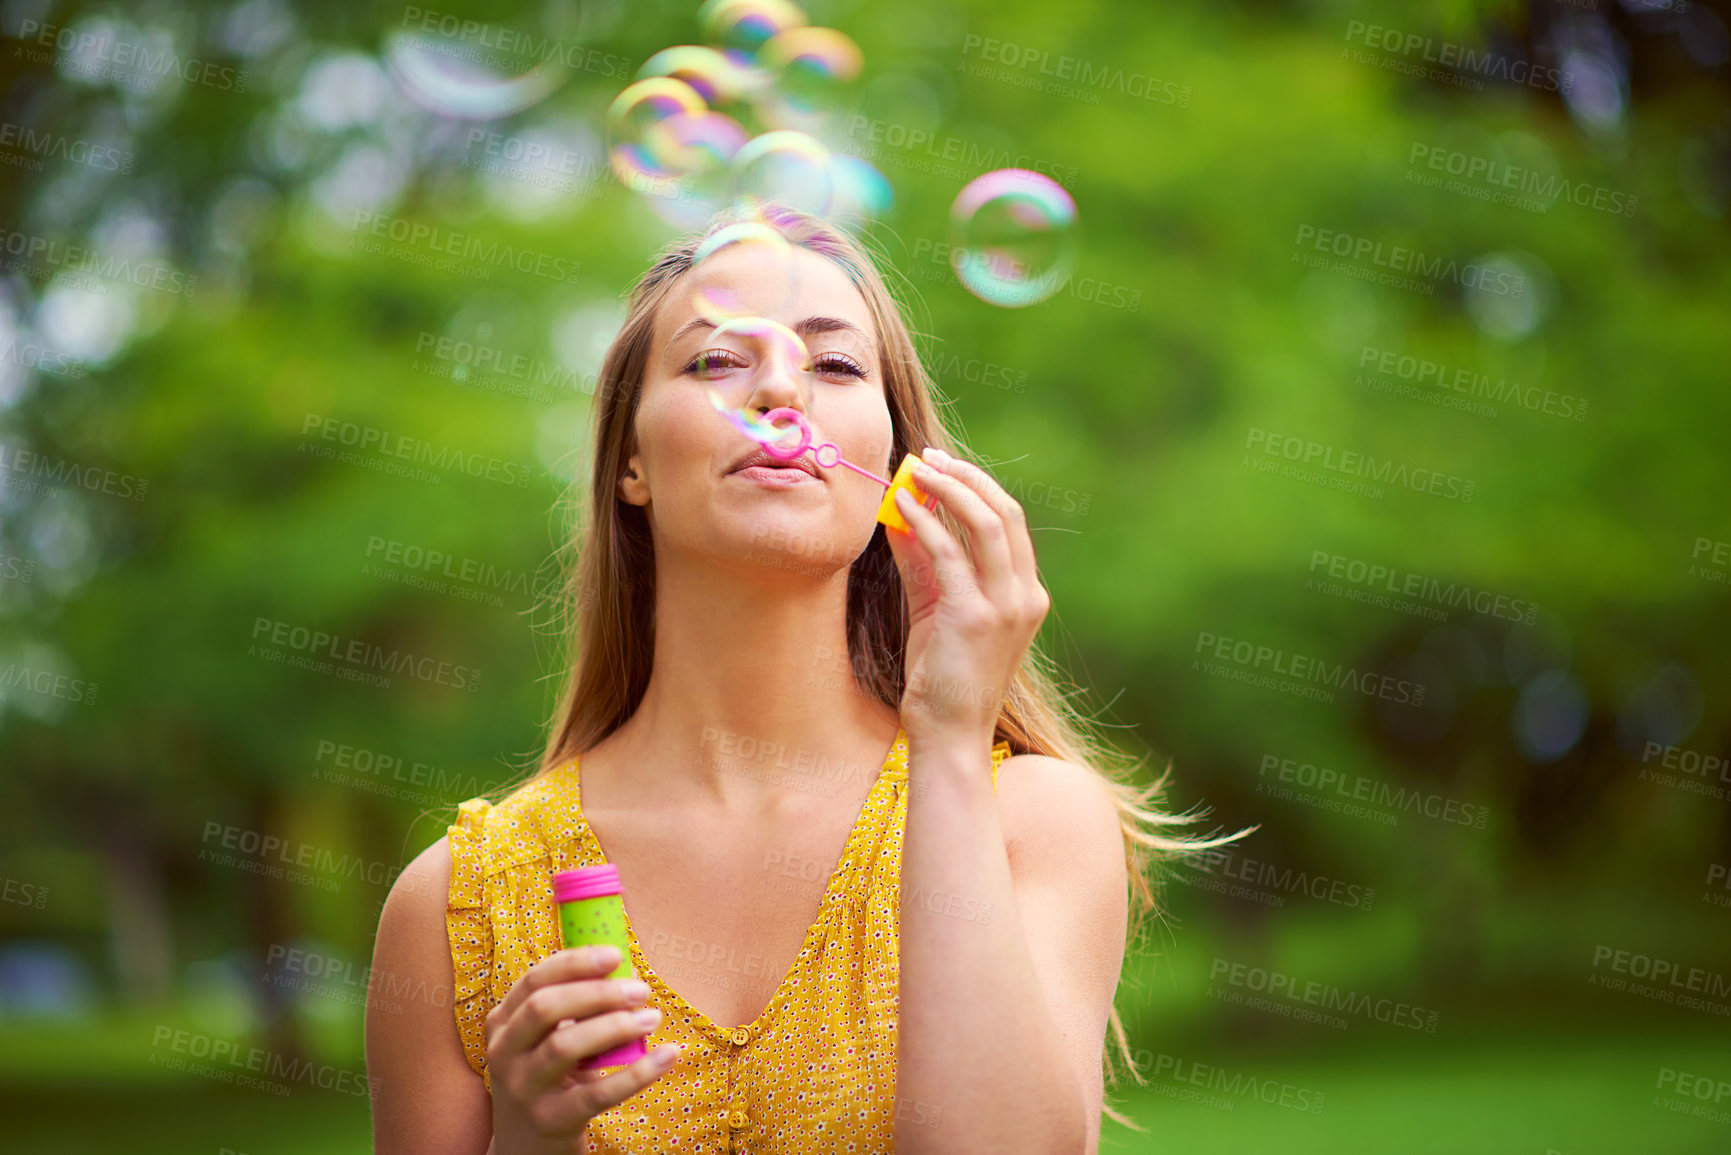 Buy stock photo Shot of a carefree young woman blowing bubbles in the park